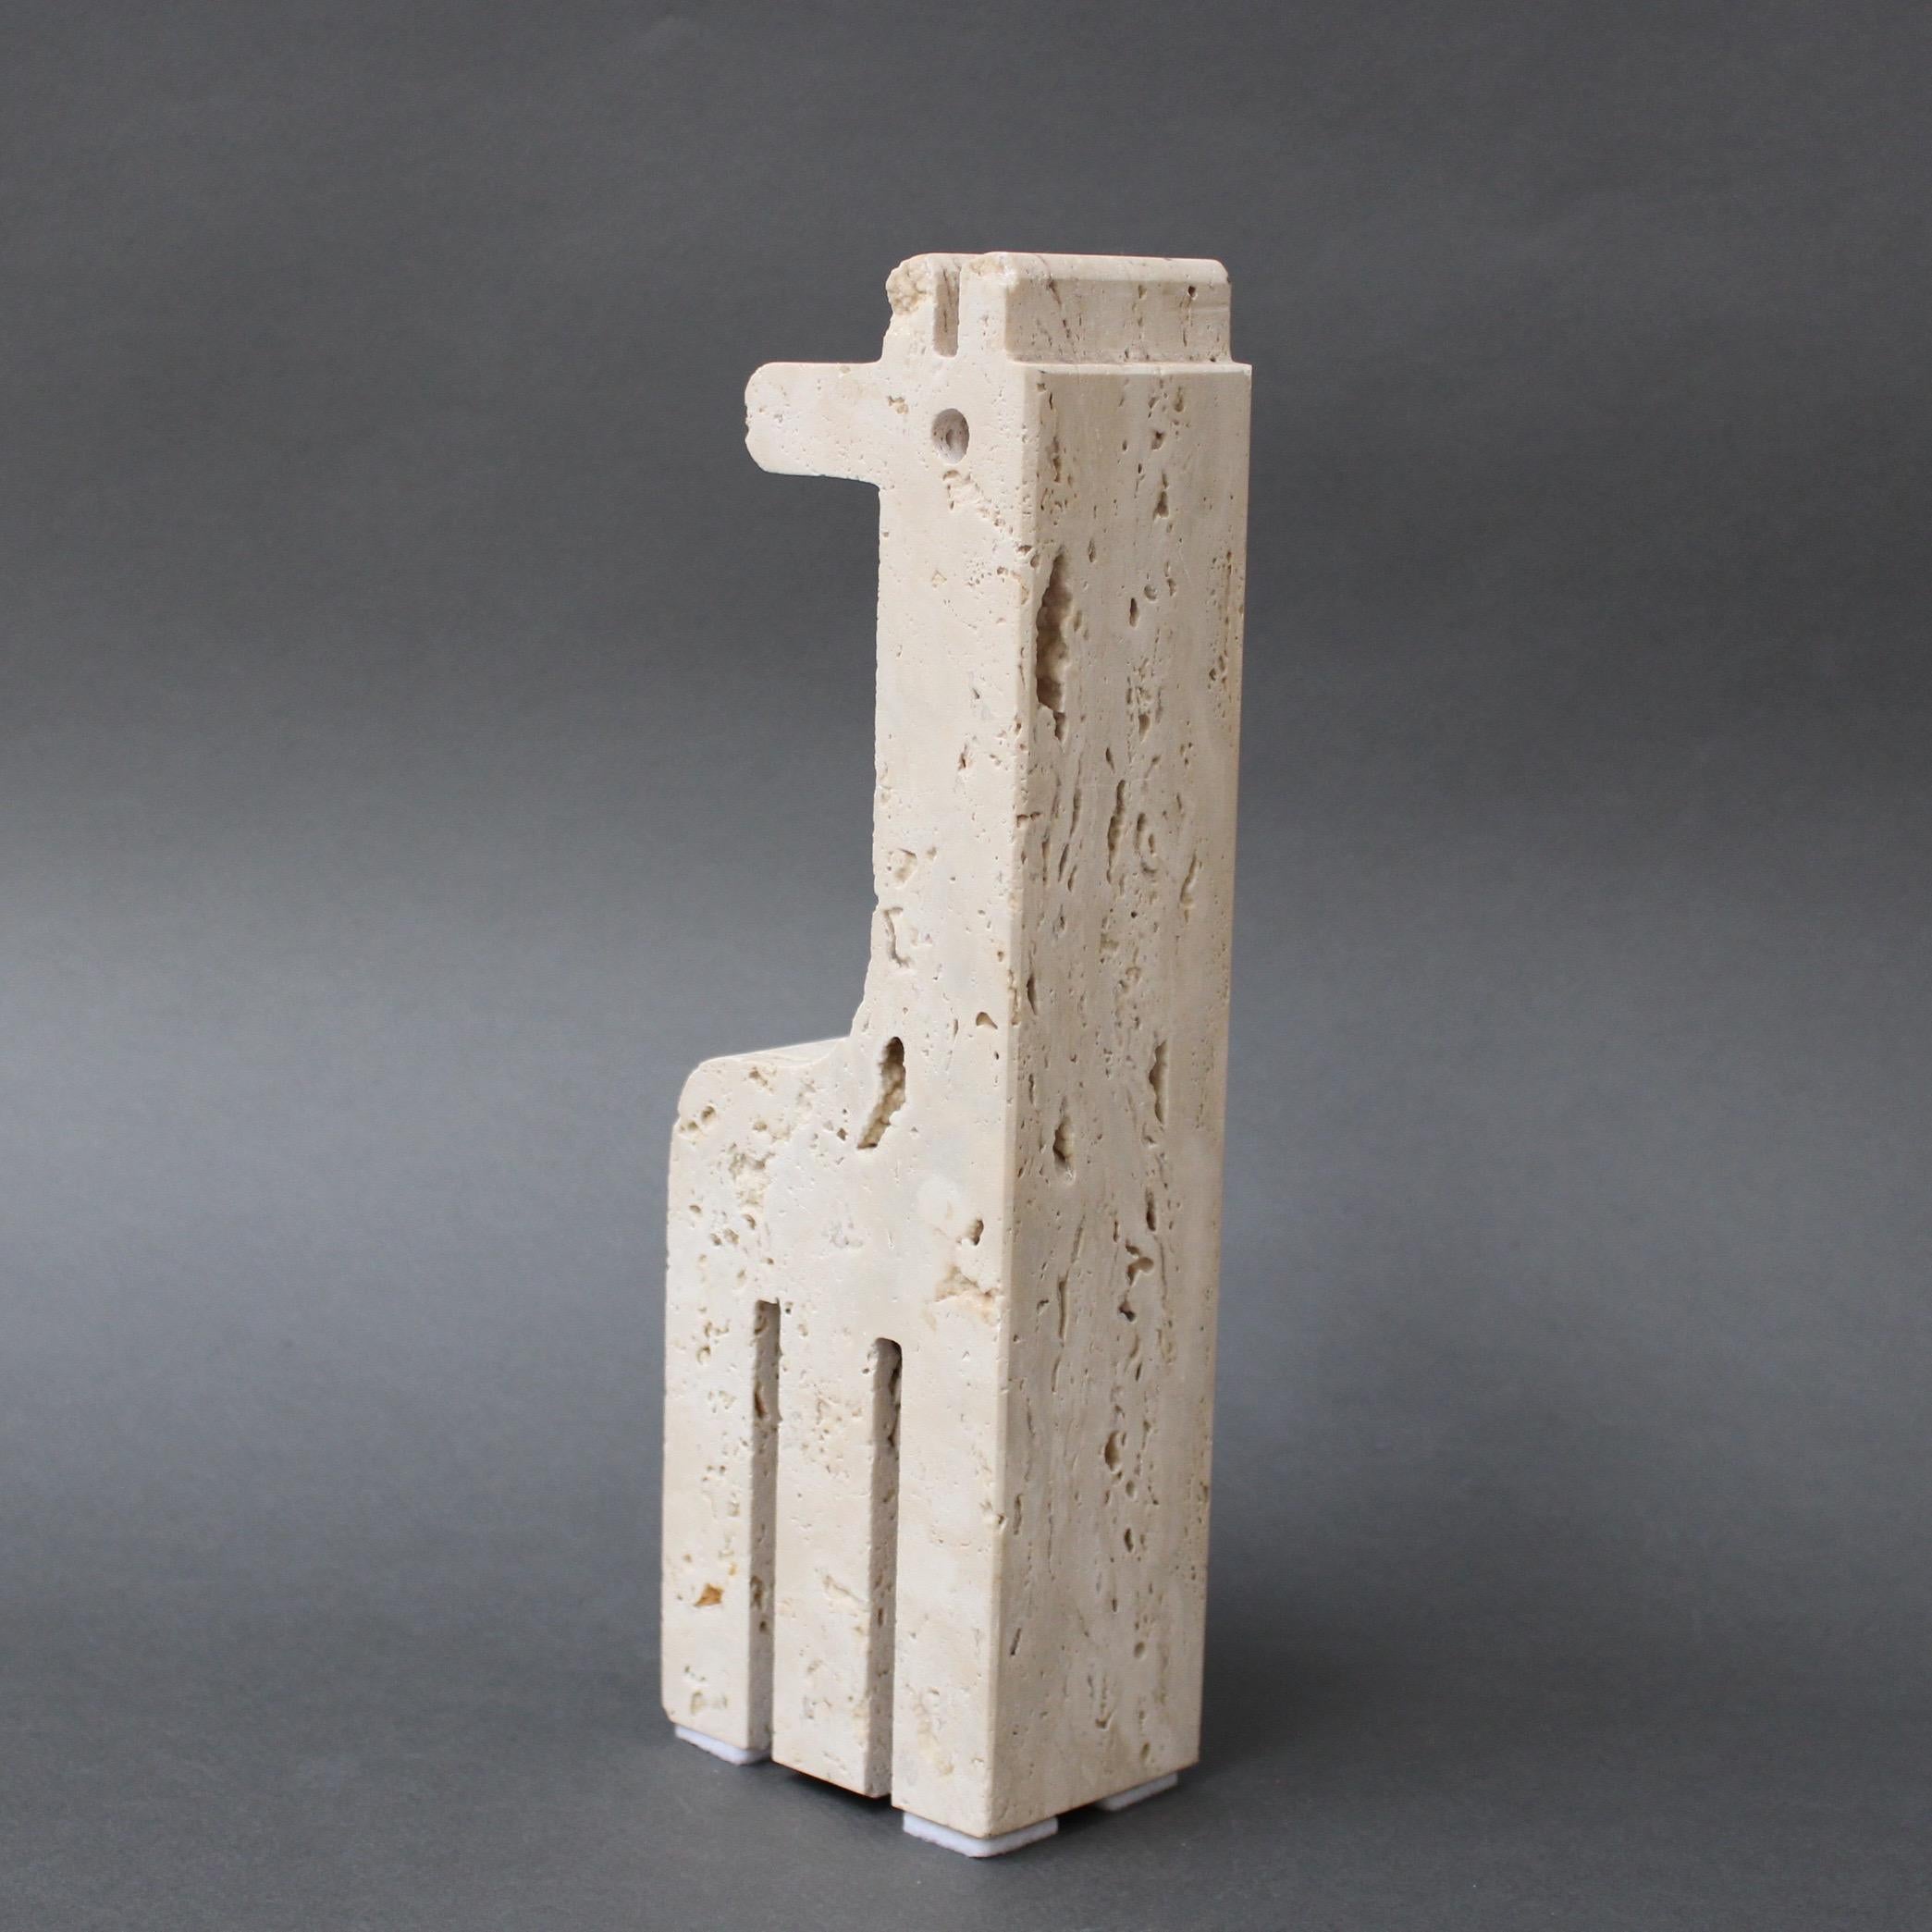 Late 20th Century Travertine Giraffe Table Sculpture by Mannelli Bros of Florence, Italy c. 1970s